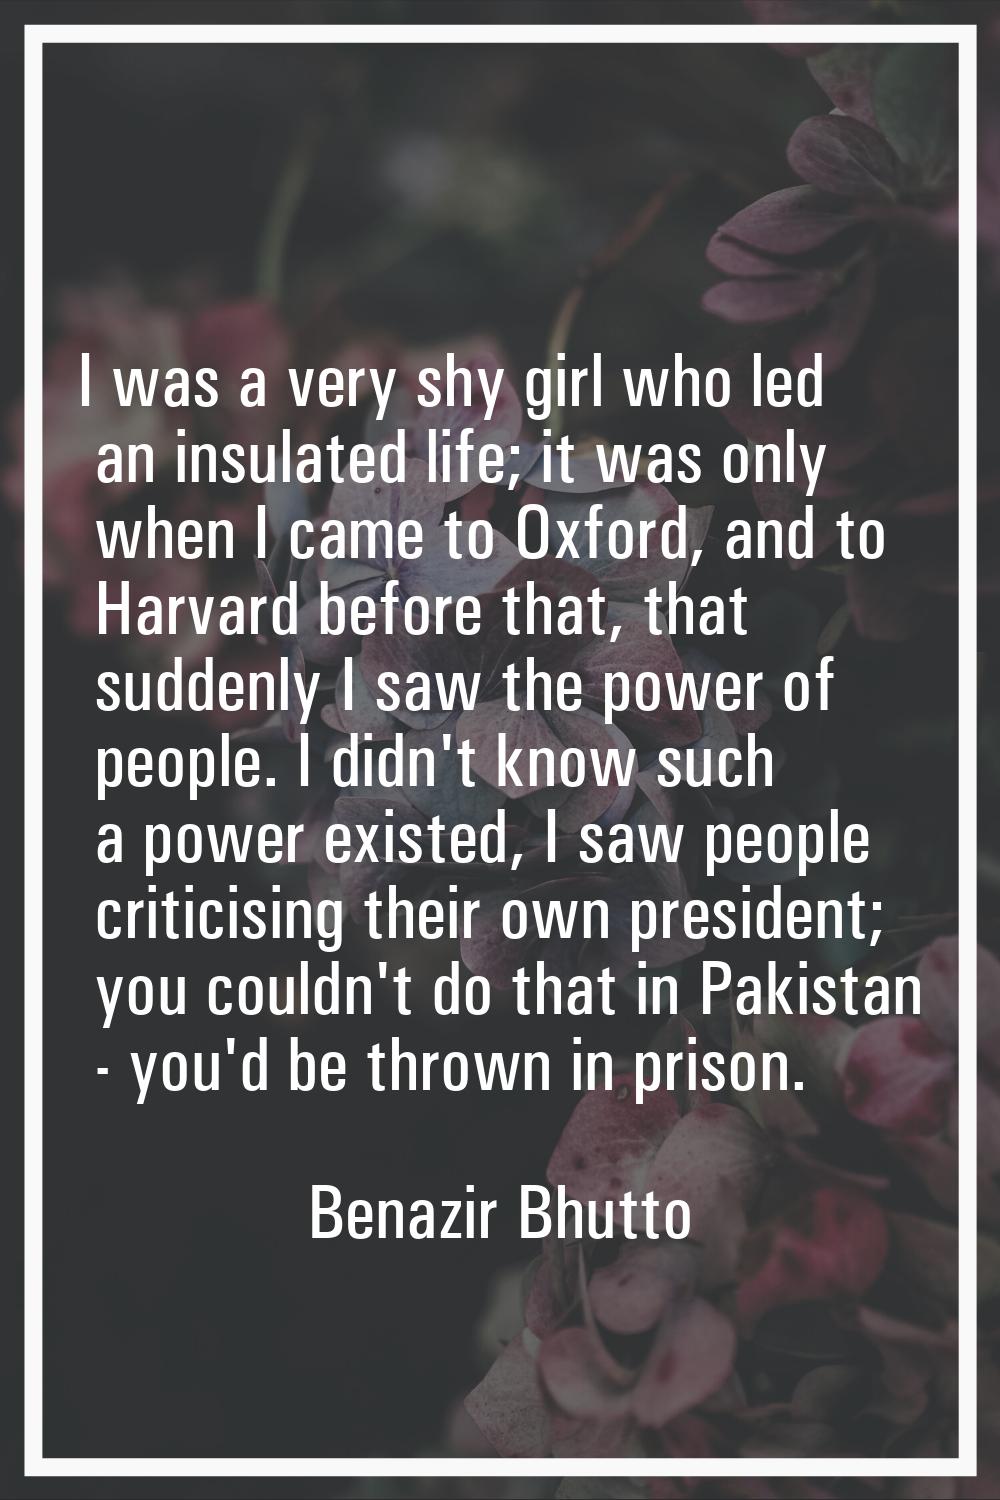 I was a very shy girl who led an insulated life; it was only when I came to Oxford, and to Harvard 